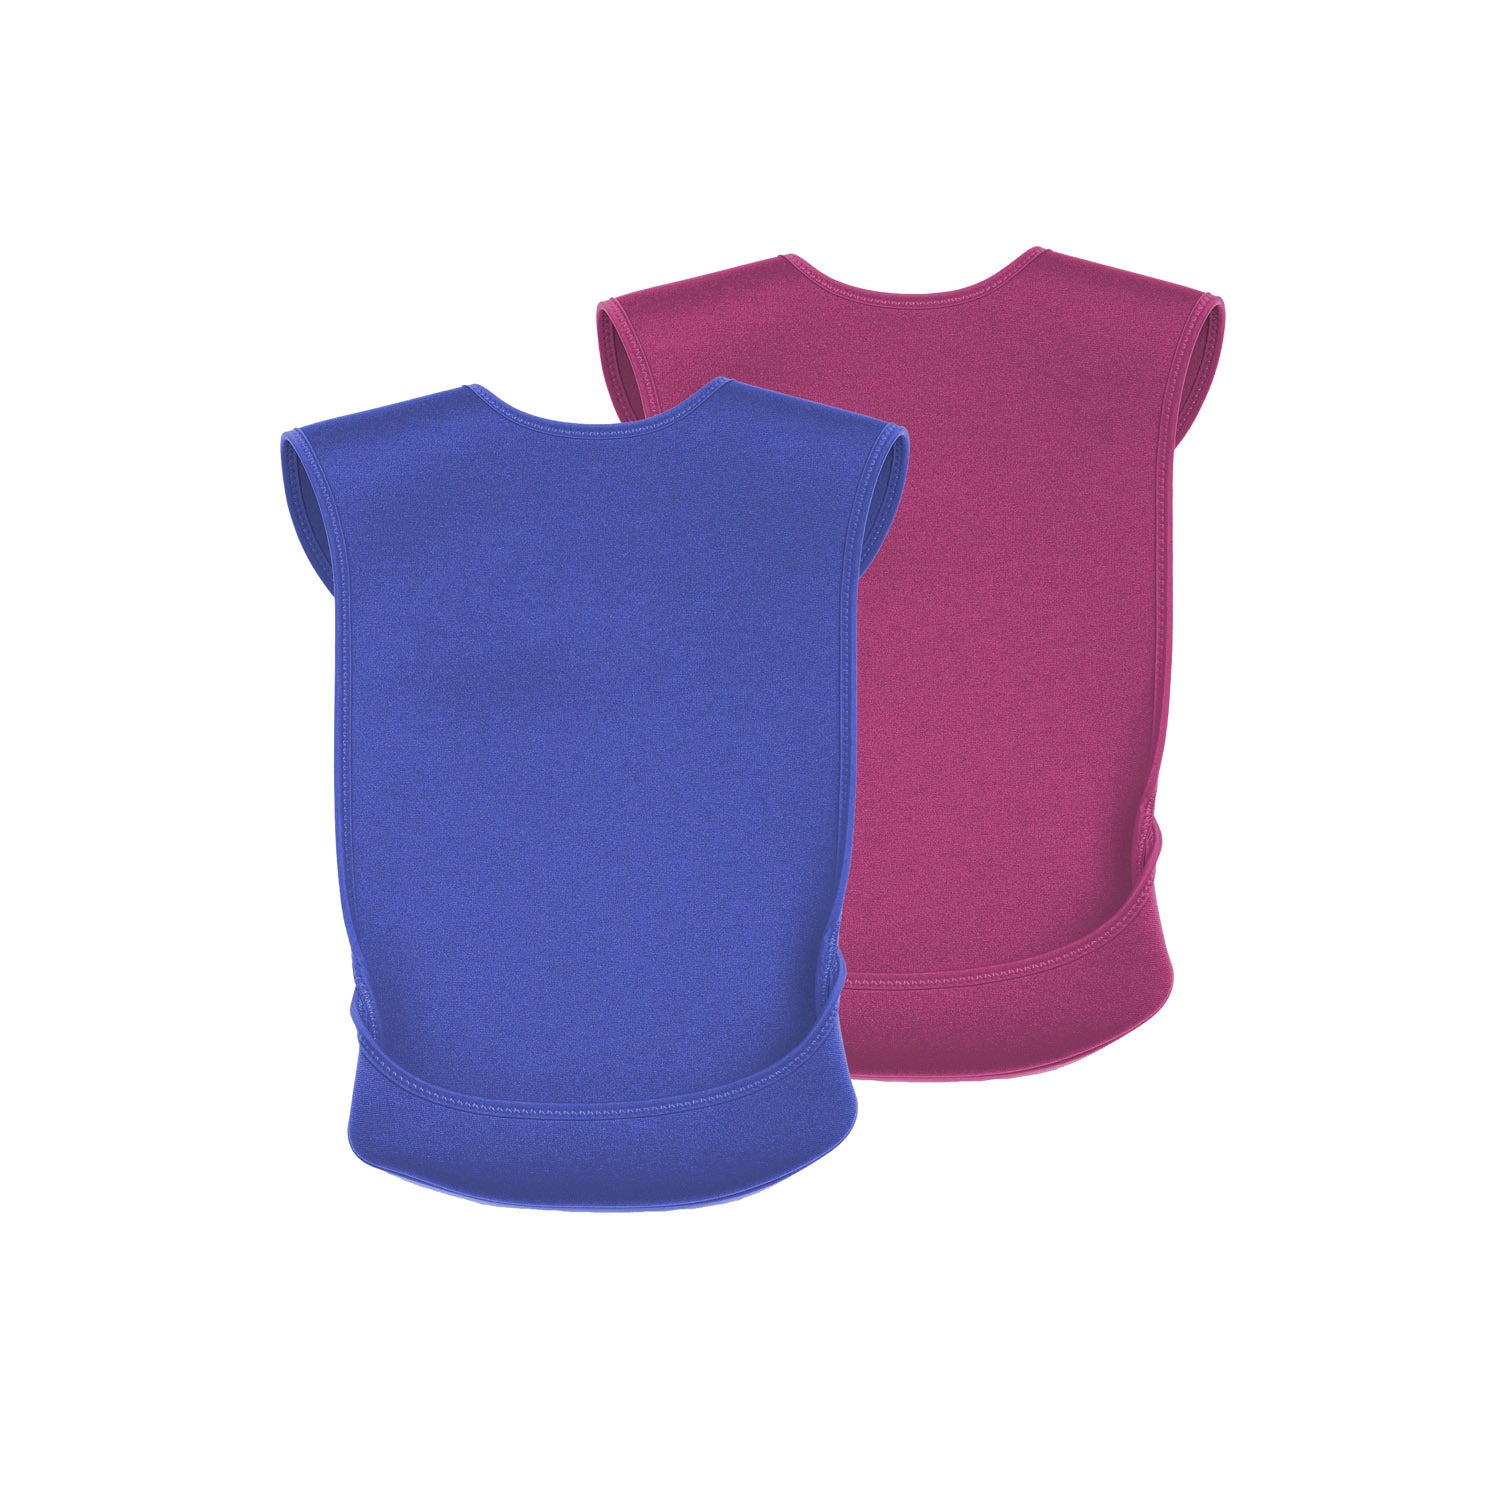 CareDesign_pink_or_blue_tabard_for_toddlers_kids_adults_with_special_needs_bib_with_feeding_pouch